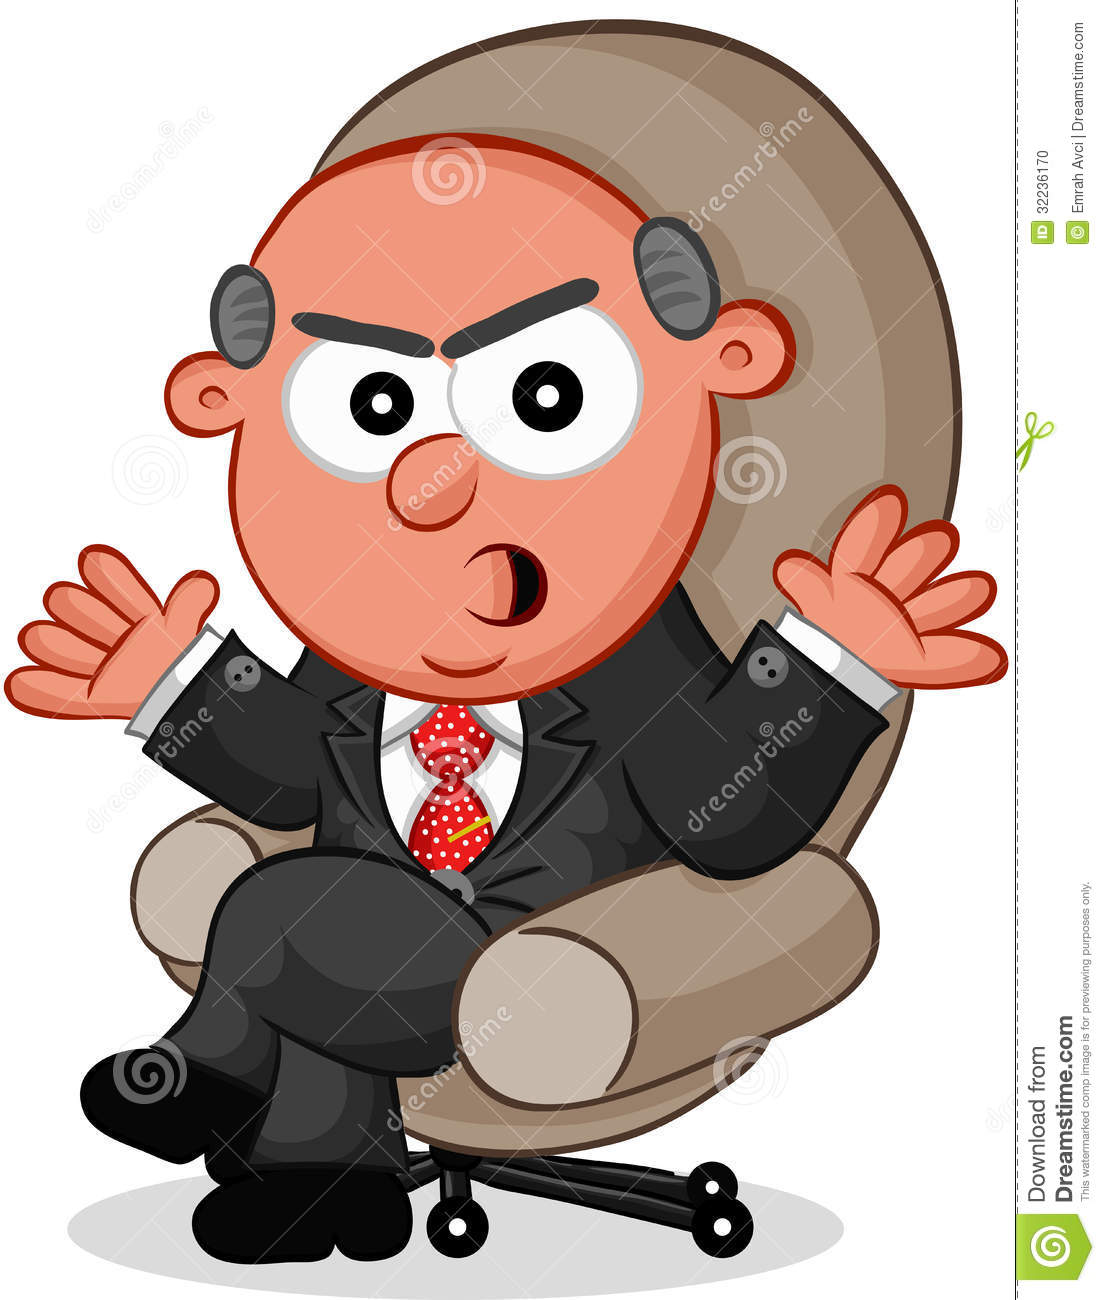 Cartoon Boss Man Sitting In A Chair And Angry